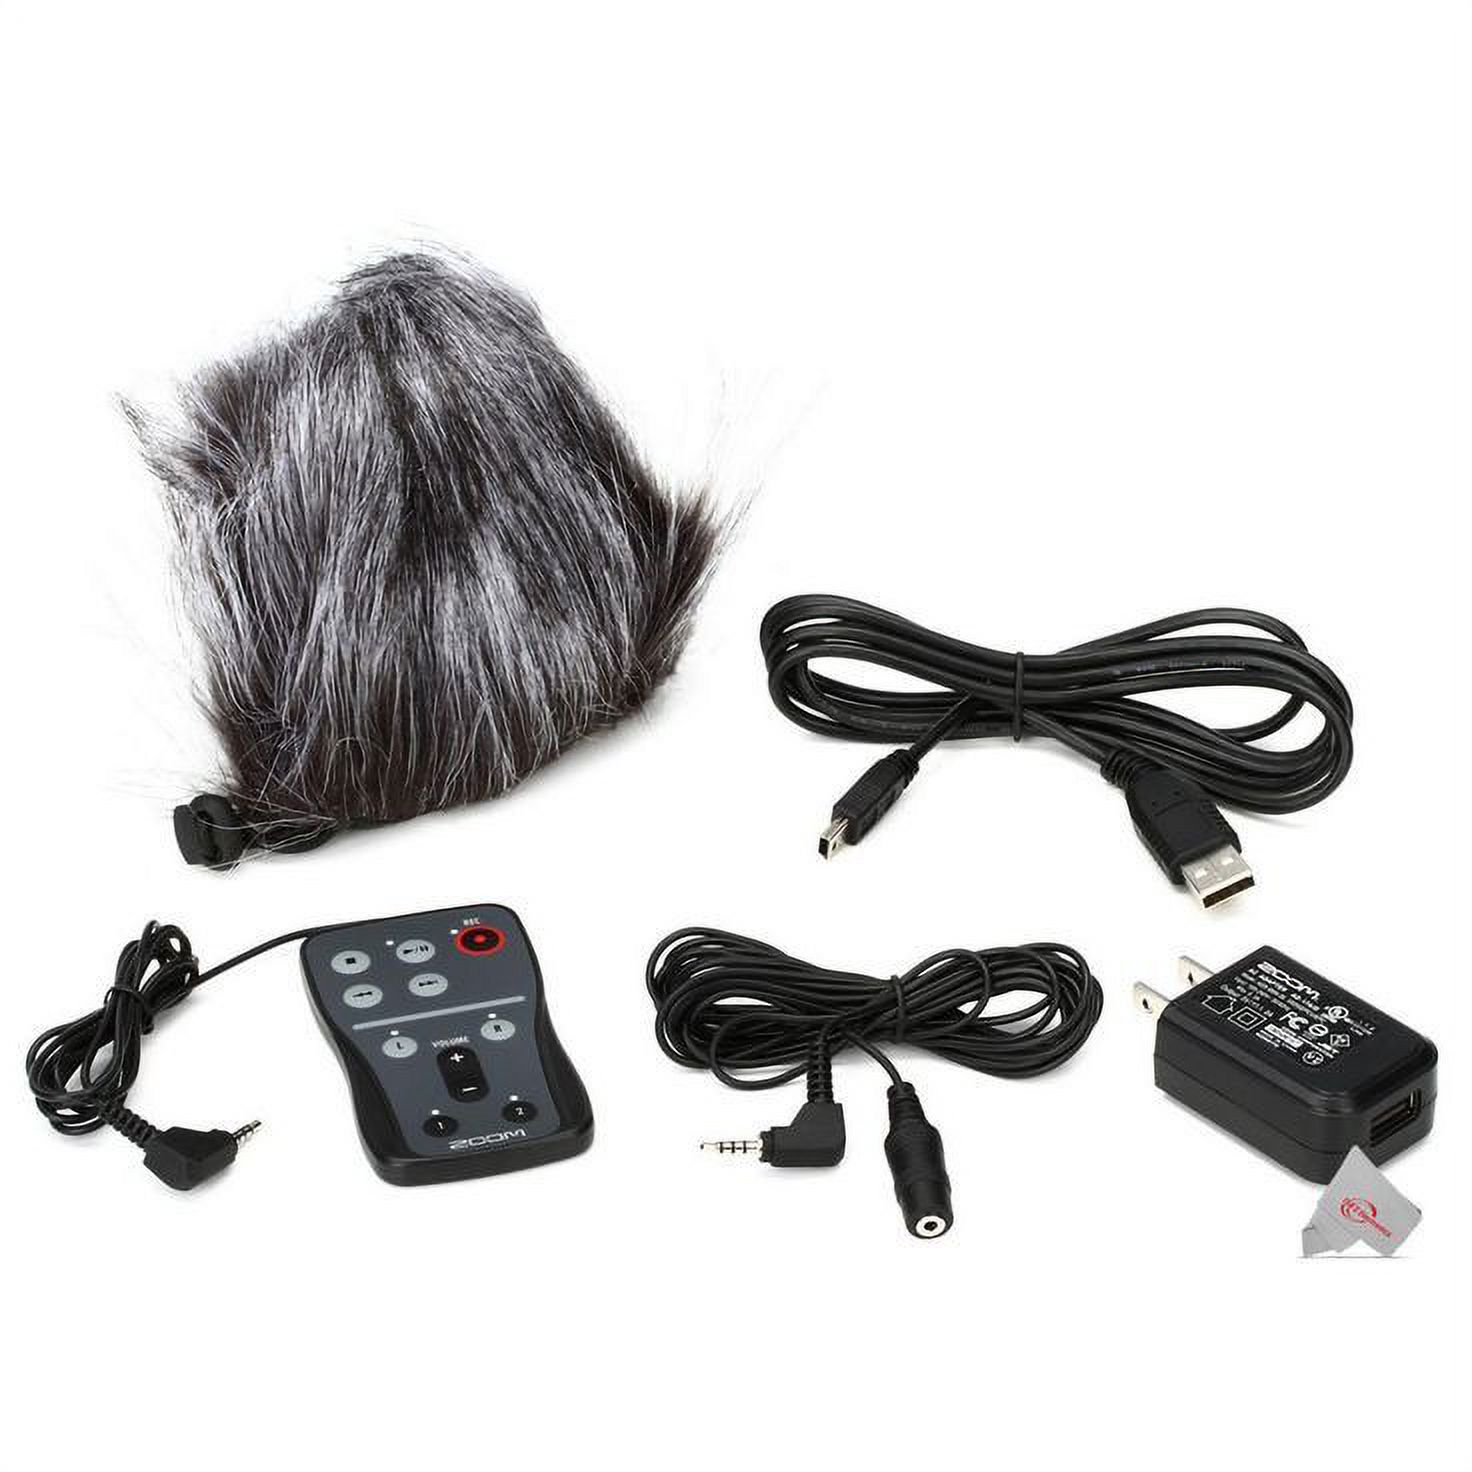 Zoom H5 4-Input / 4-Track Portable Handy Digital Recorder + ZOOM H5 Accessory Pack - image 3 of 4